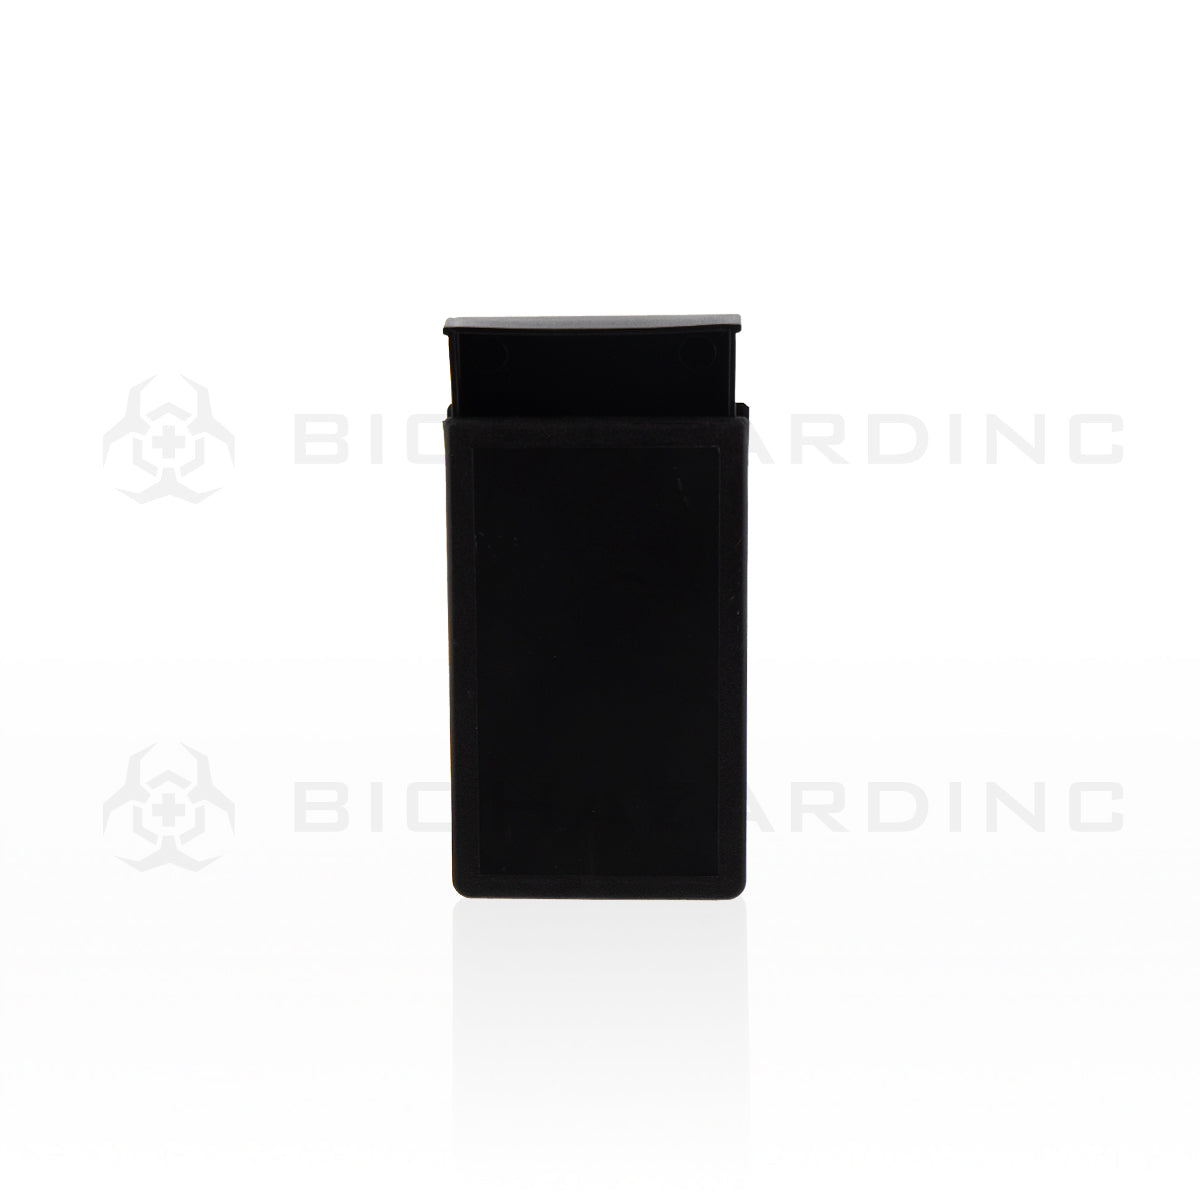 Preroll Cases | 85mm Portable Joint Boxes | 360 Count Black Pre Roll Case Biohazard Inc   